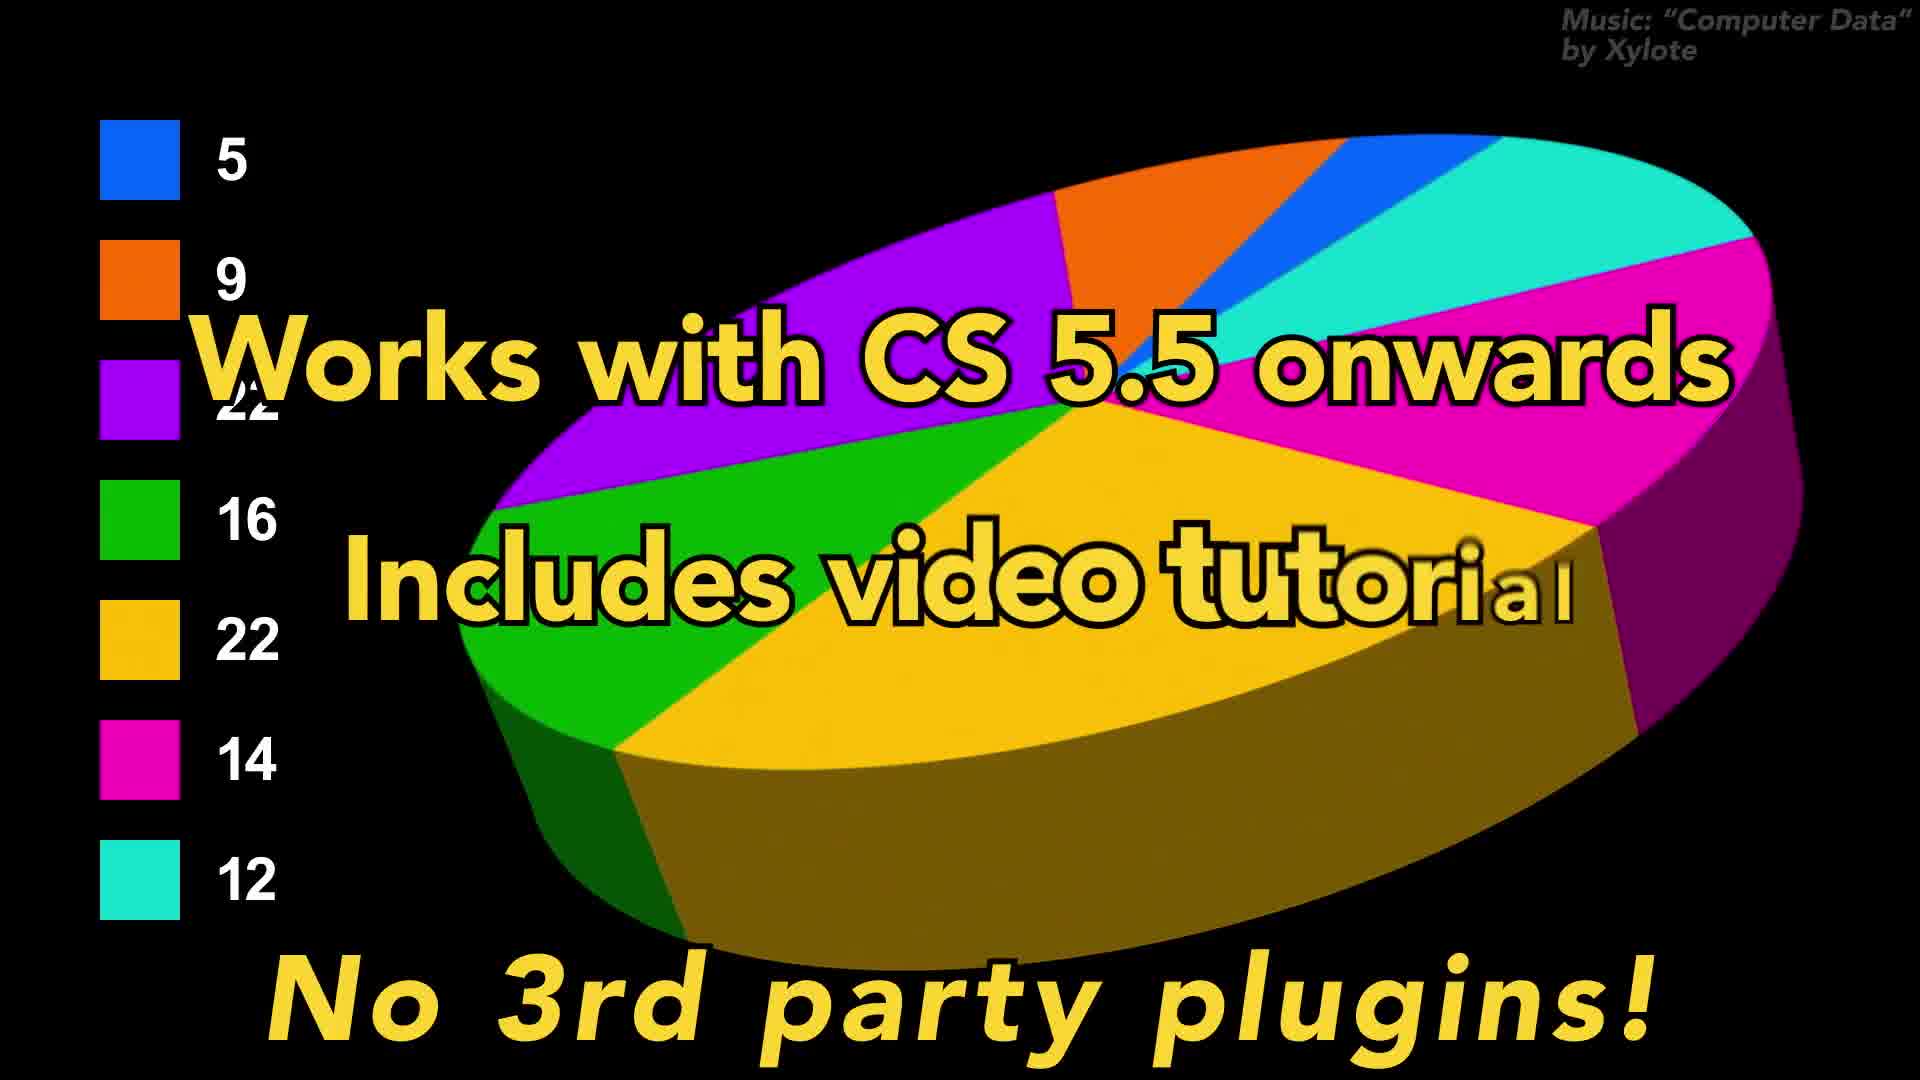 3D Pie Chart no plugins needed! - Download Videohive 22421994